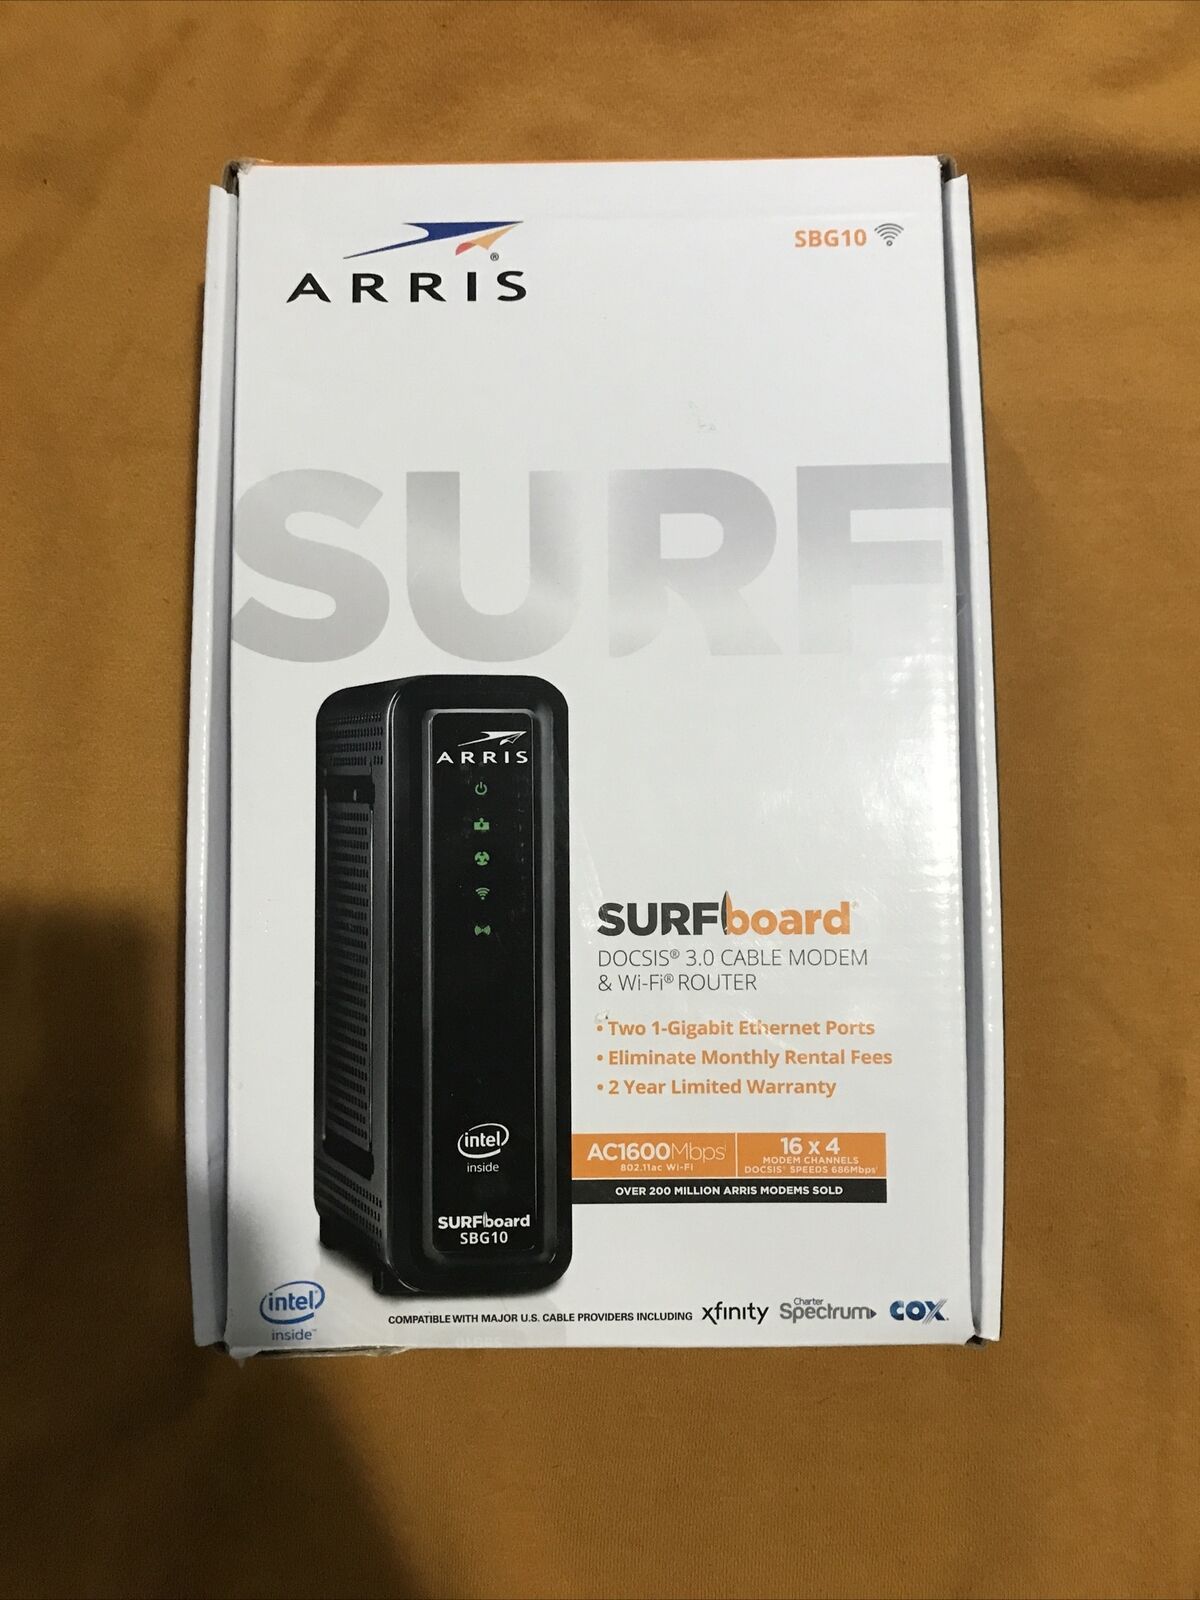 ARRIS SBG10 Dual Band Wi-Fi Router Cable Modem DOCSIS 3.0 AC1600 Pre-Owned